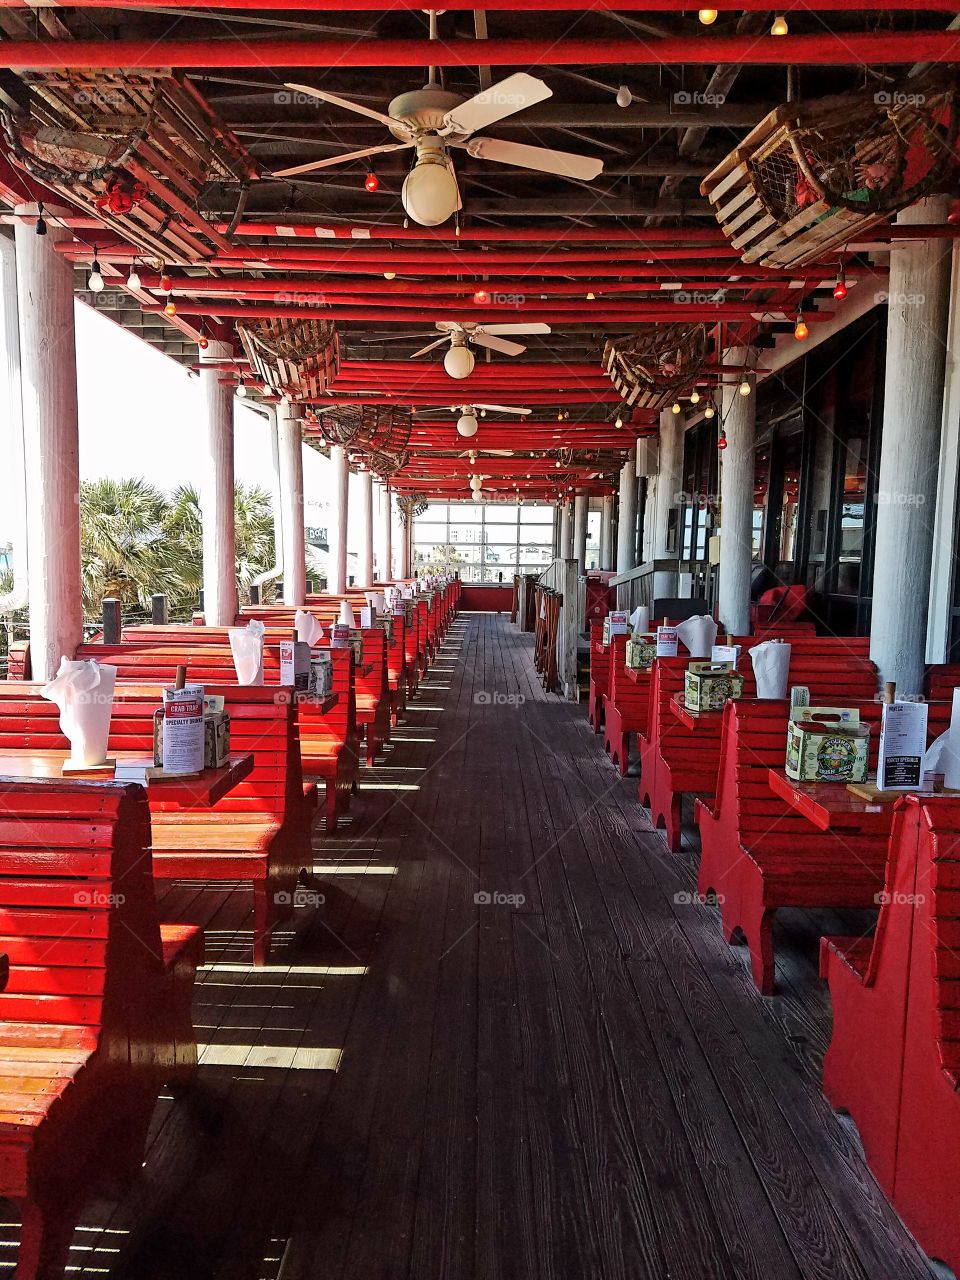 Red tables and bench seats at beach front restaurant on Pensacola Beach Florida.  Natural wood floors , white pillars and ceiling fans. architecture in perspective.